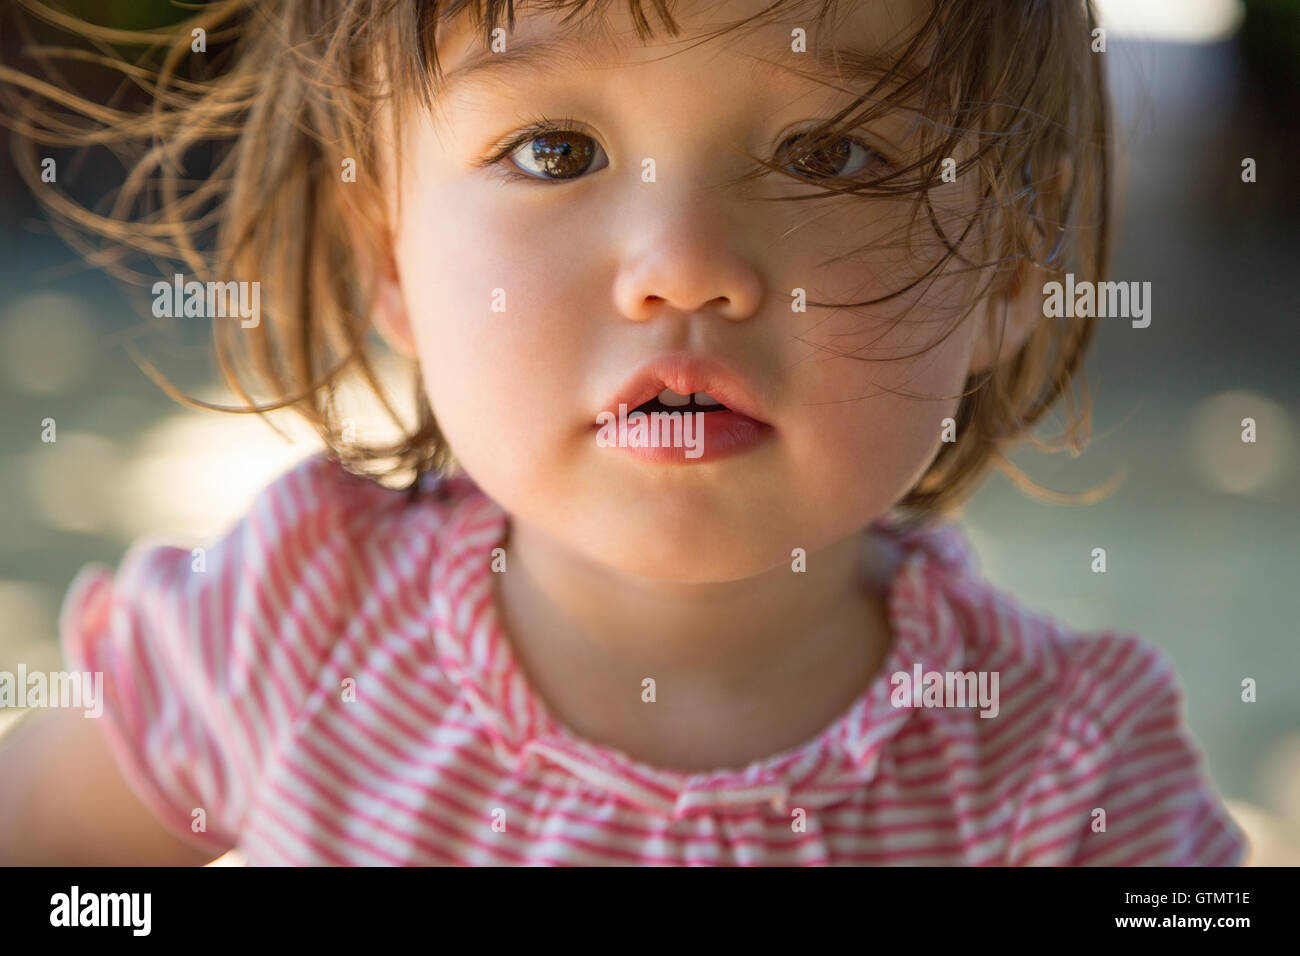 Dreamy expression of two year old toddler girl Stock Photo